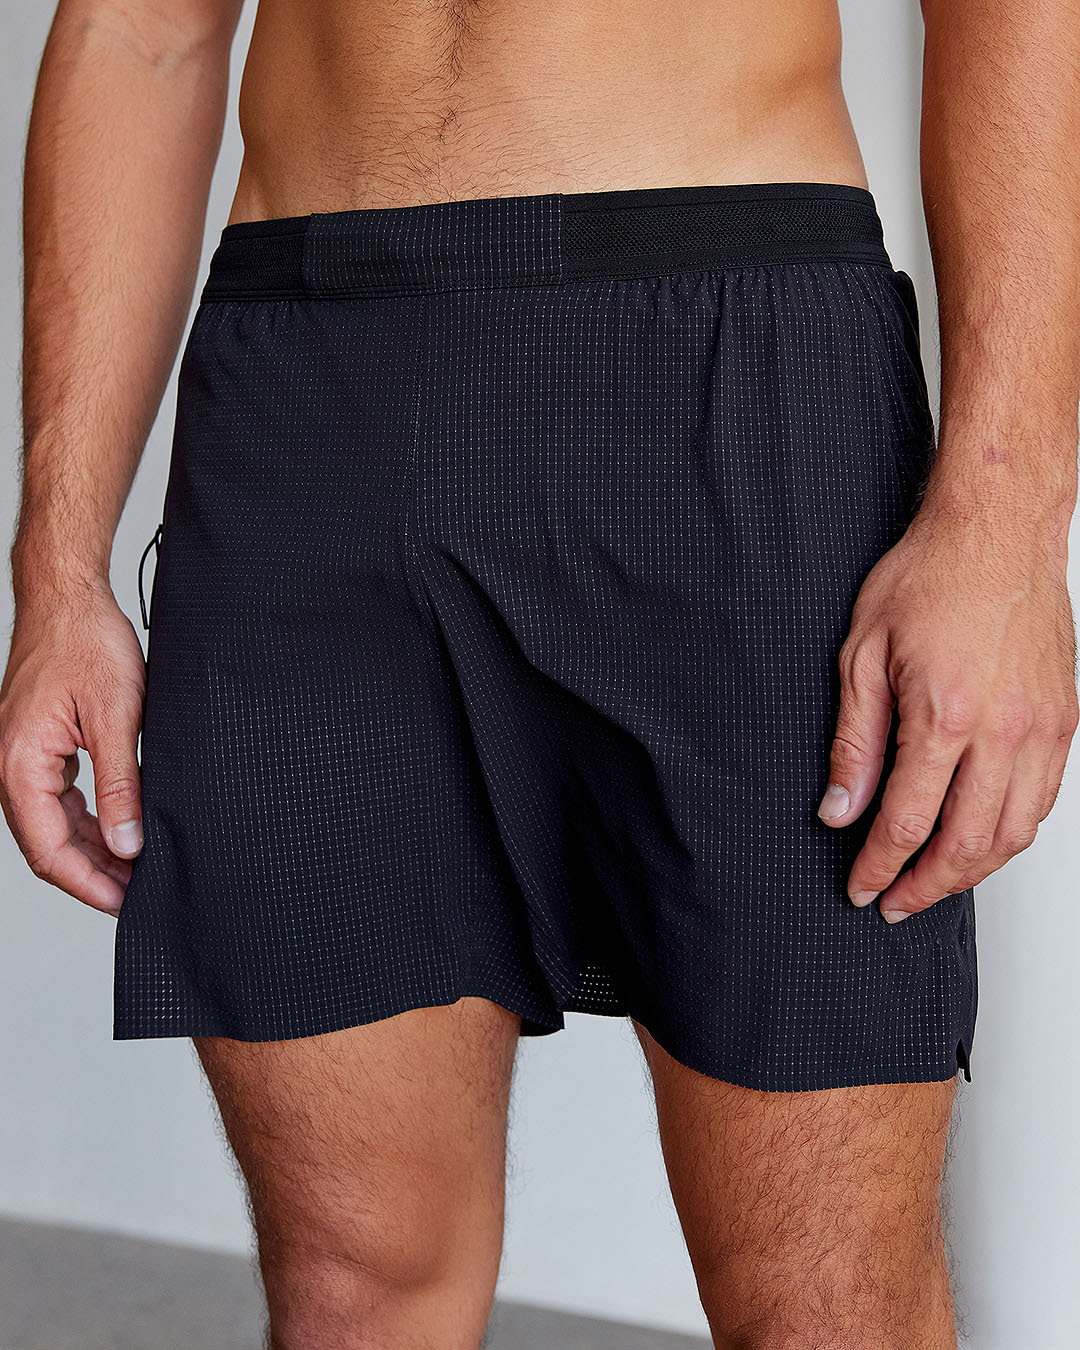 Someone models a slick pair of running shorts from LSKD, a great Valentine's Day gift option.